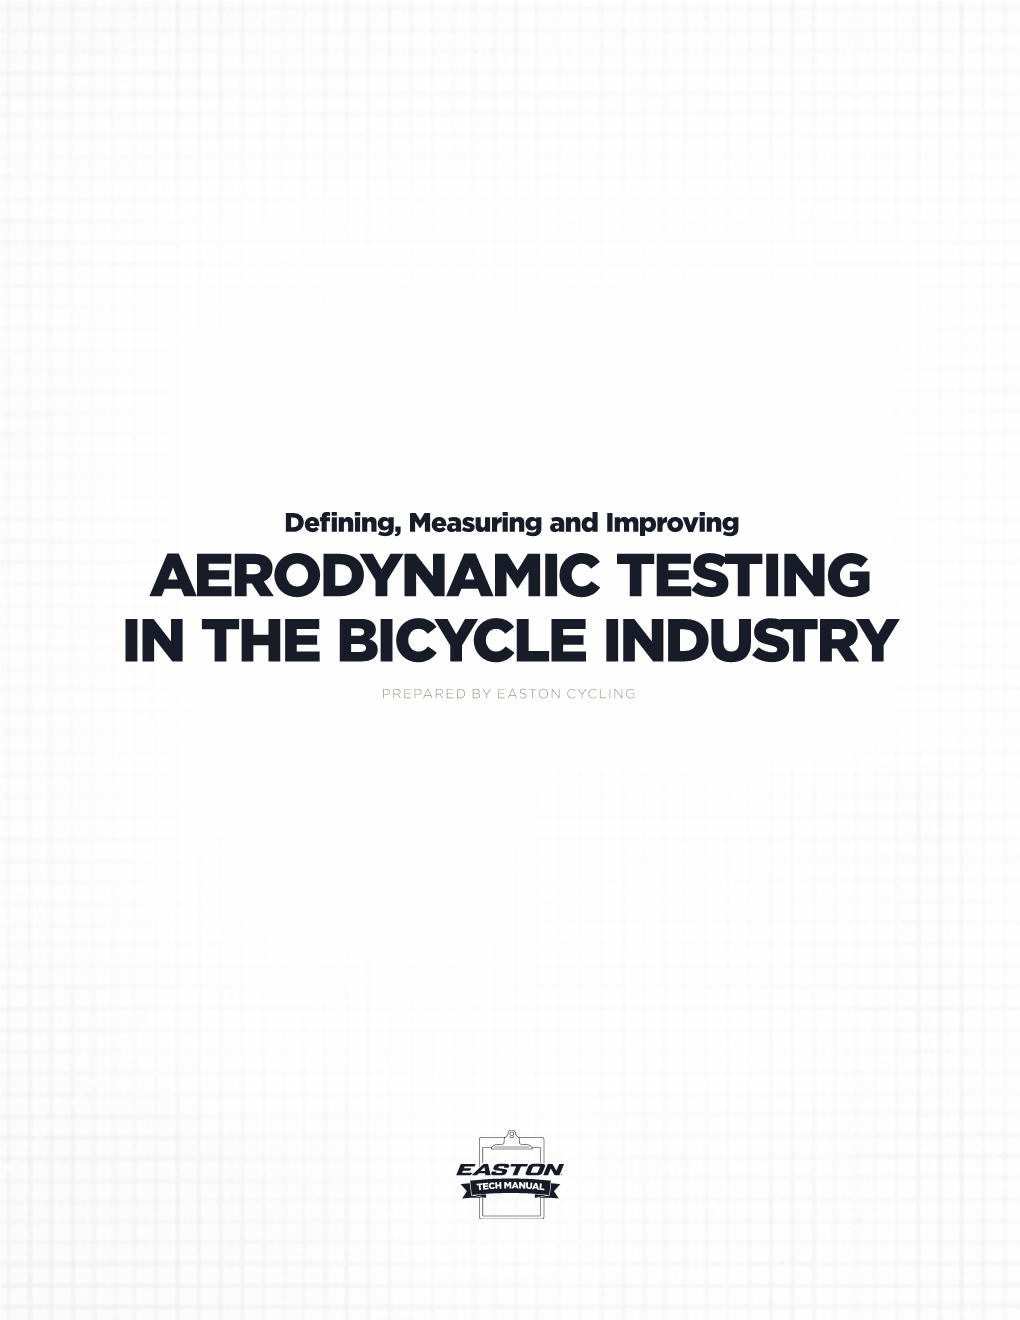 Defining, Measuring and Improving Aerodynamic Testing in the Bicycle Industry